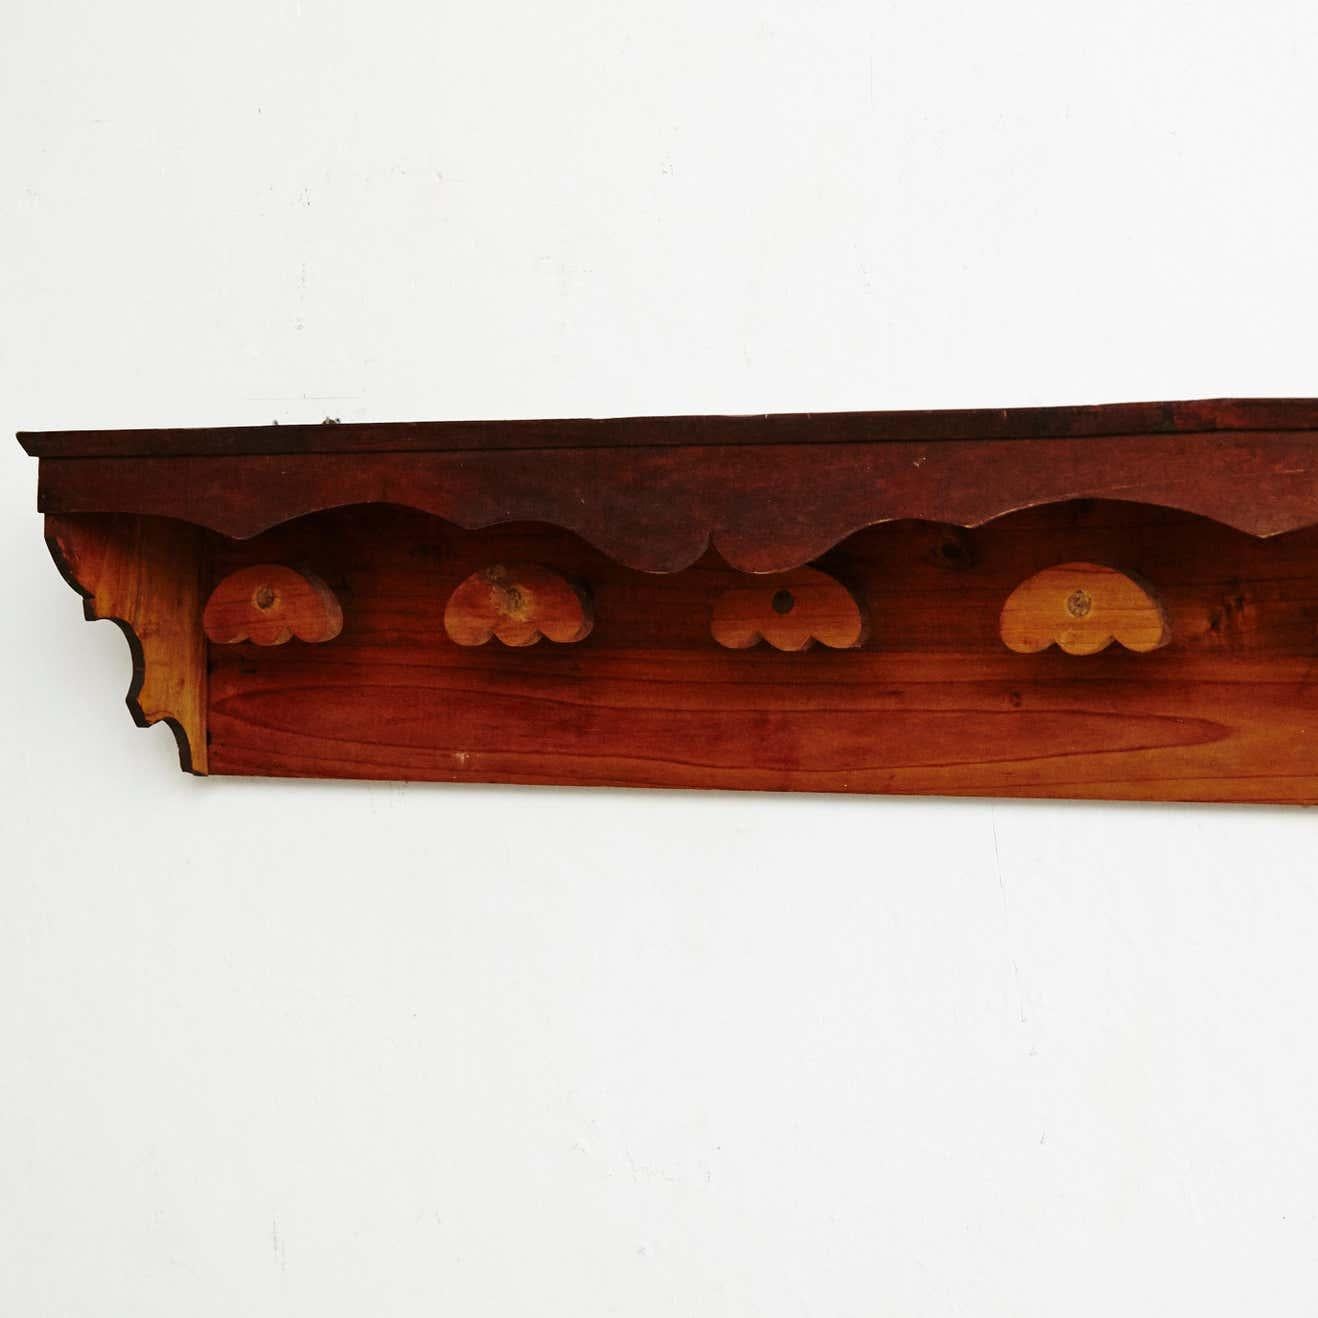 Coat rack designed by unknown designer made in wood circa 1950 in Spain

Wood

In original condition, with minor wear consistent with age and use, preserving a beautiful patina.